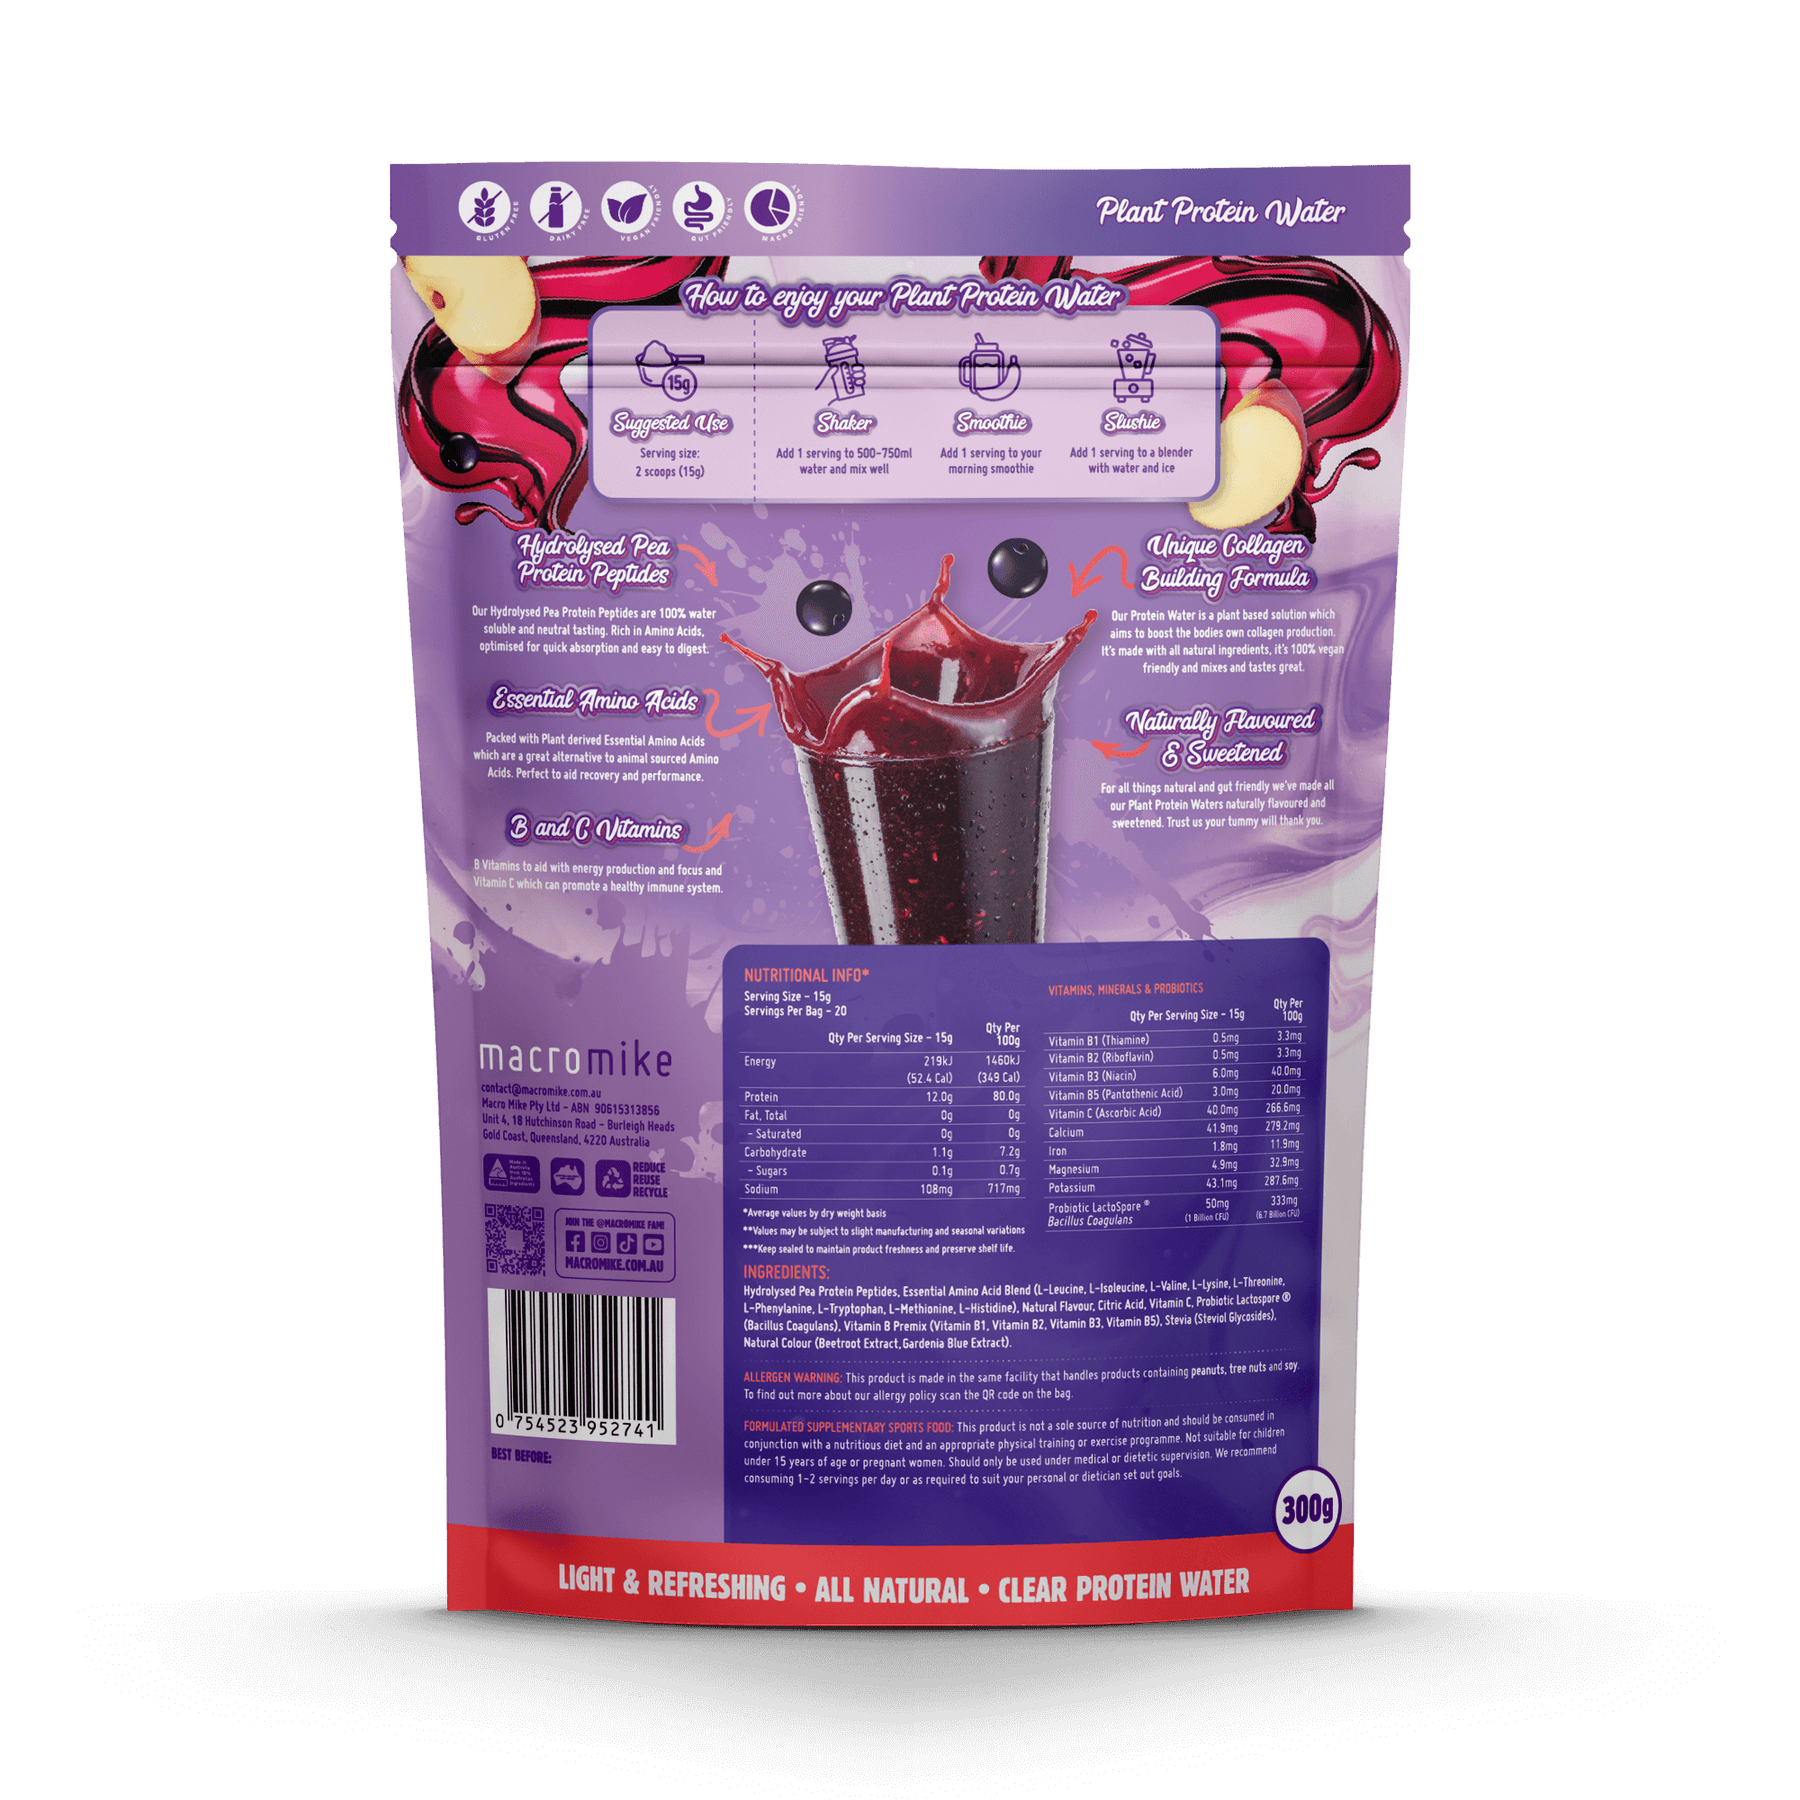 Macro Mike Plant Protein Water - Super Nutrition